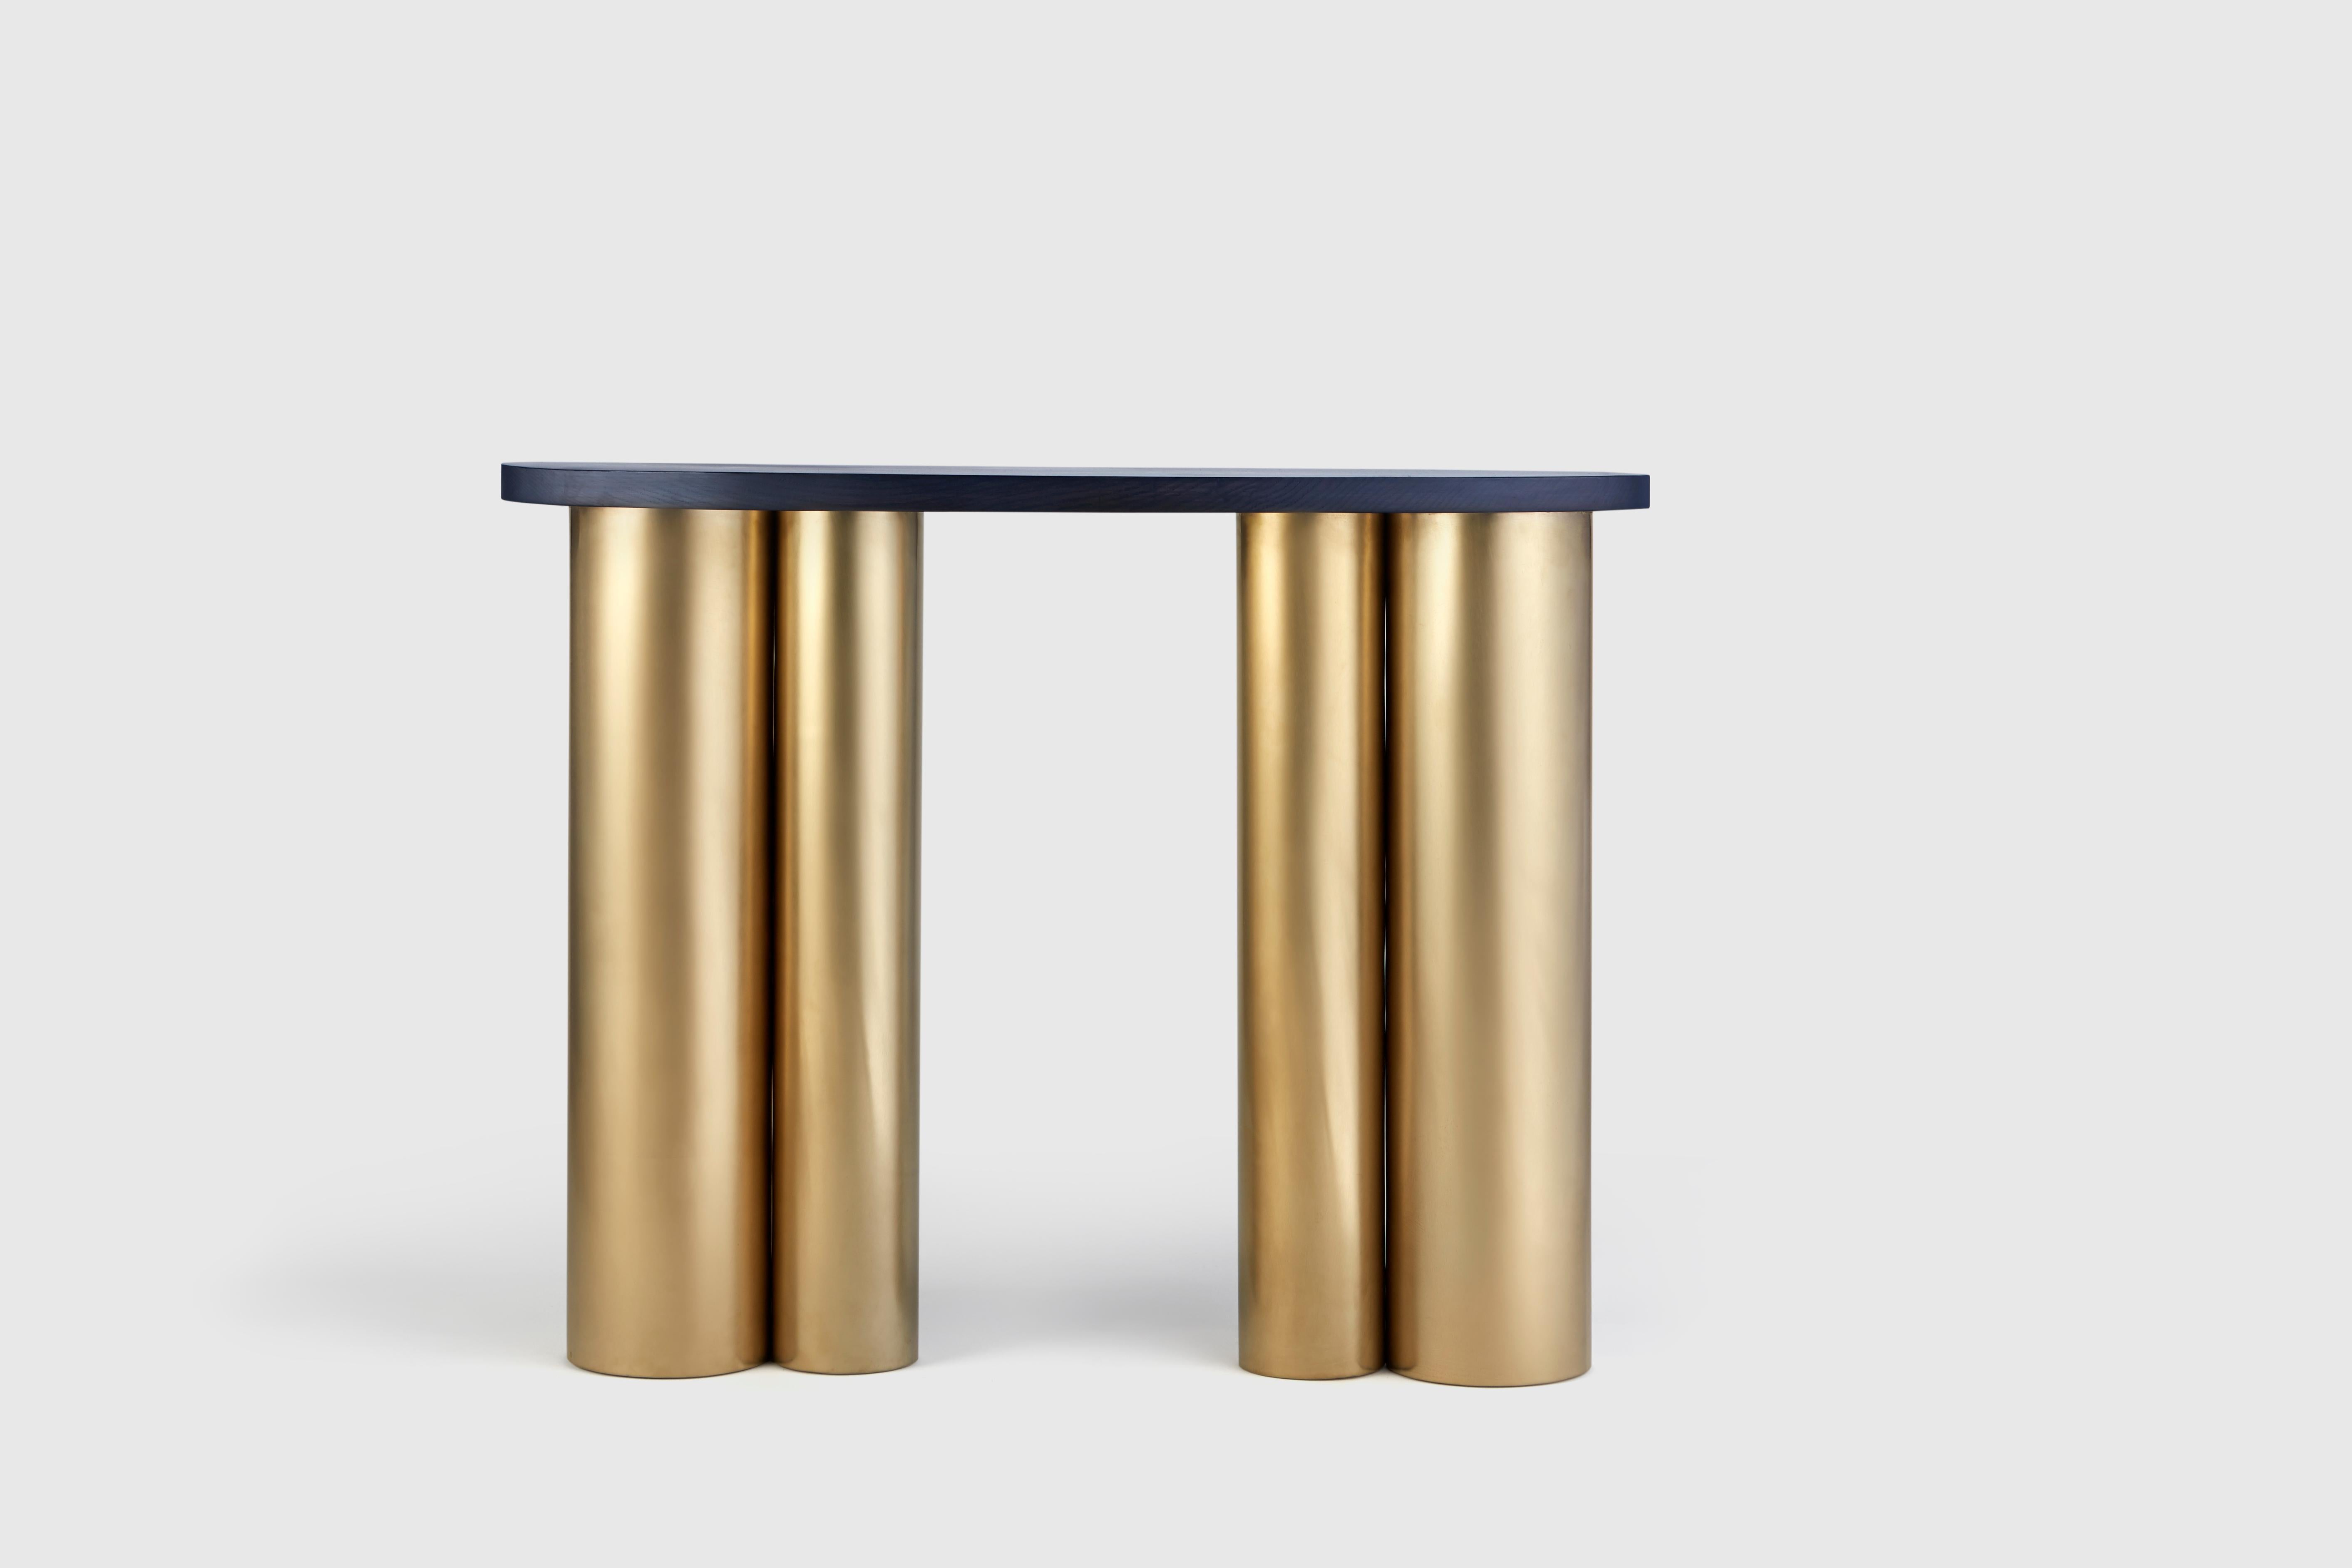 Unique bloom table gold by Hatsu.
Dimensions: D 40 x W 40 x H 80 cm.
Materials: stained solid wood on eloctroplated steel body.

Hatsu is a design studio based in Mumbai that creates modern lighting that are unique and immediately recognisable.